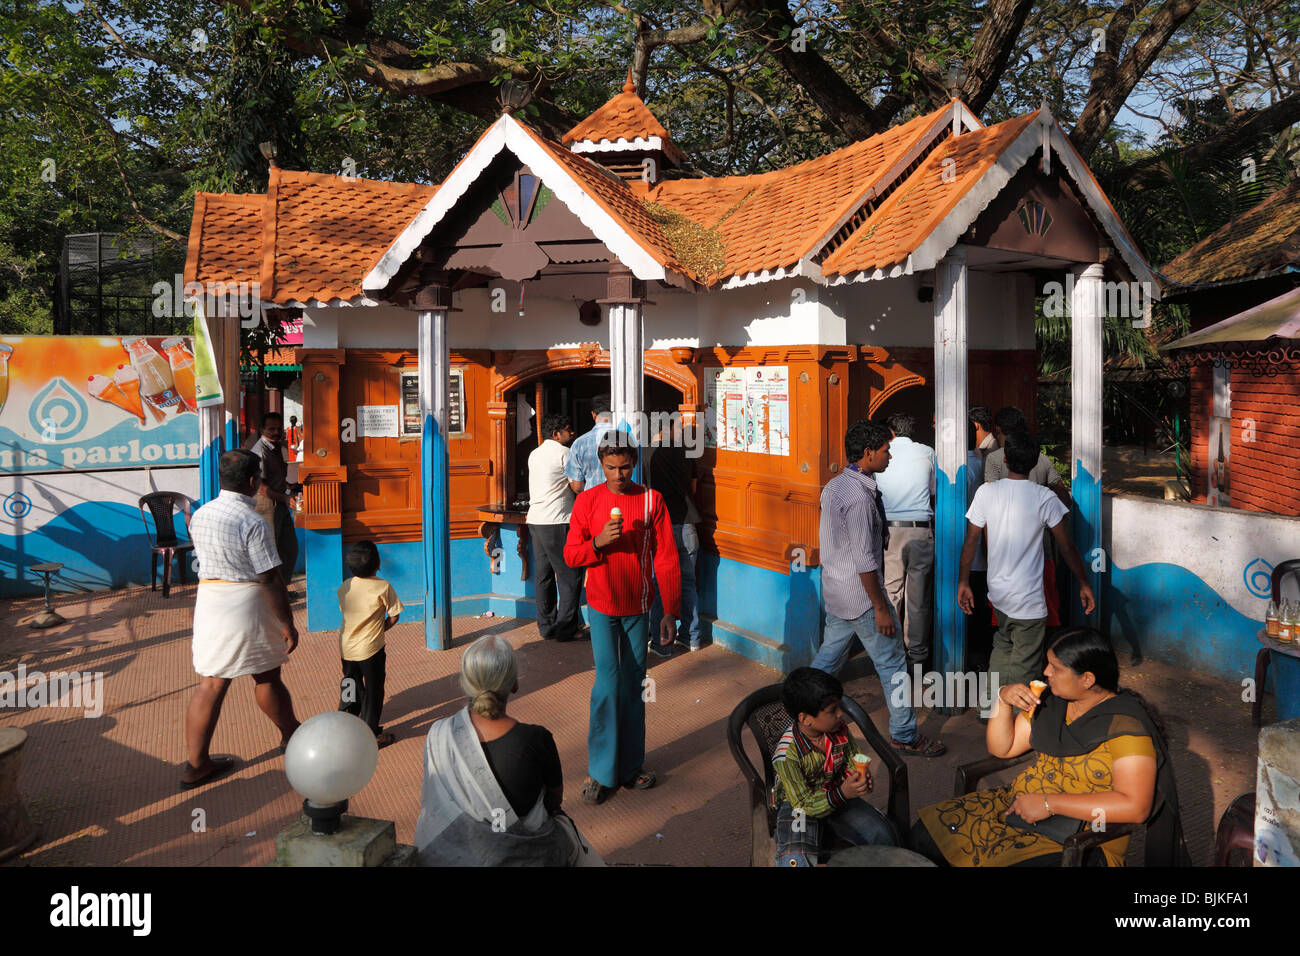 Pavilion in front of a zoo in Trivandrum, Thiruvananthapuram, Kerala state, India, Asia Stock Photo